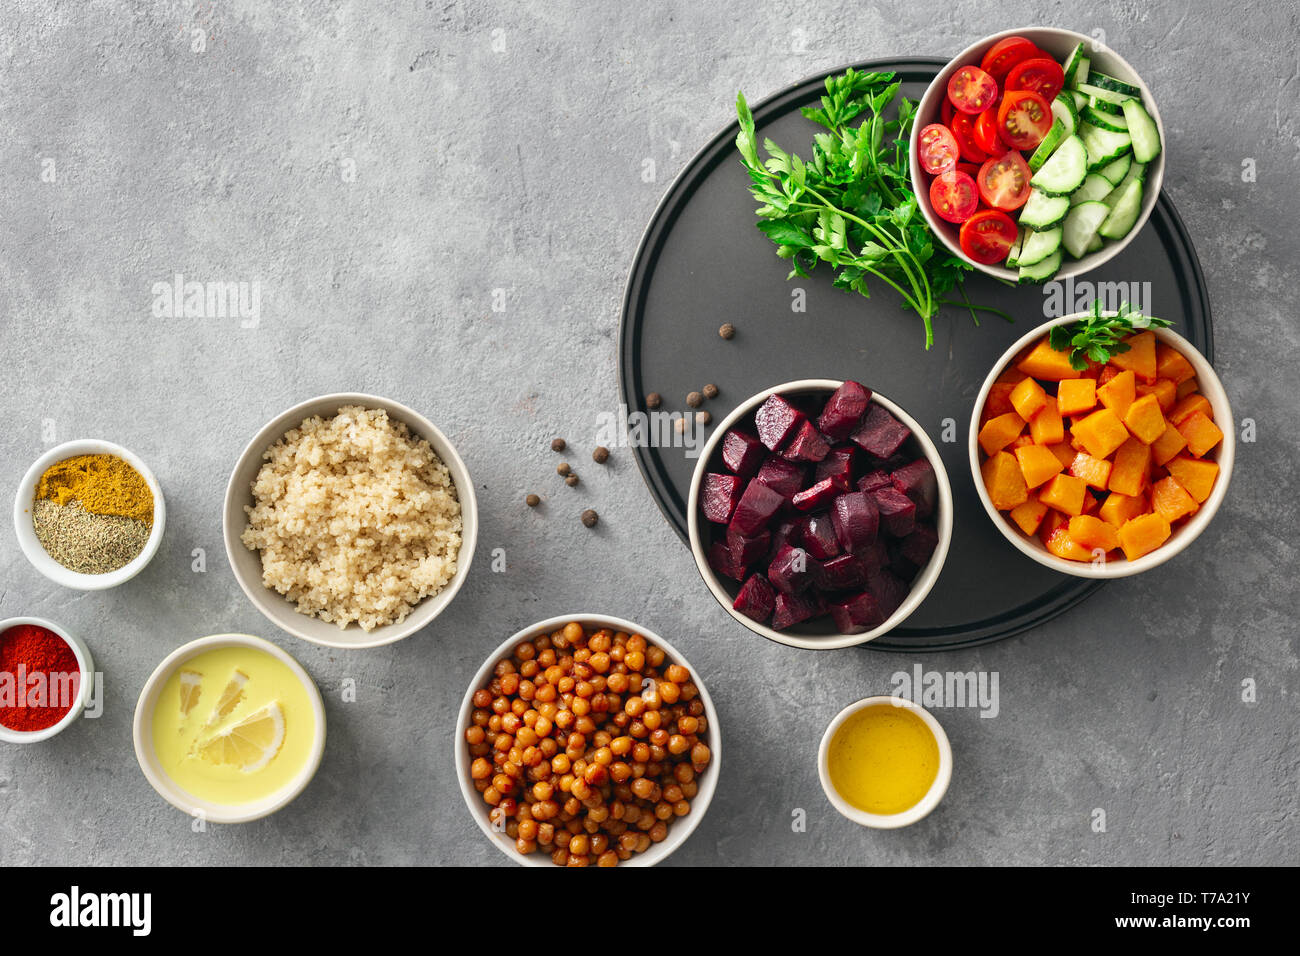 Set food for cooking healthy vegetarian food. Spiced chickpeas, baked pumpkin and beets, quinoa and vegetables top view Stock Photo